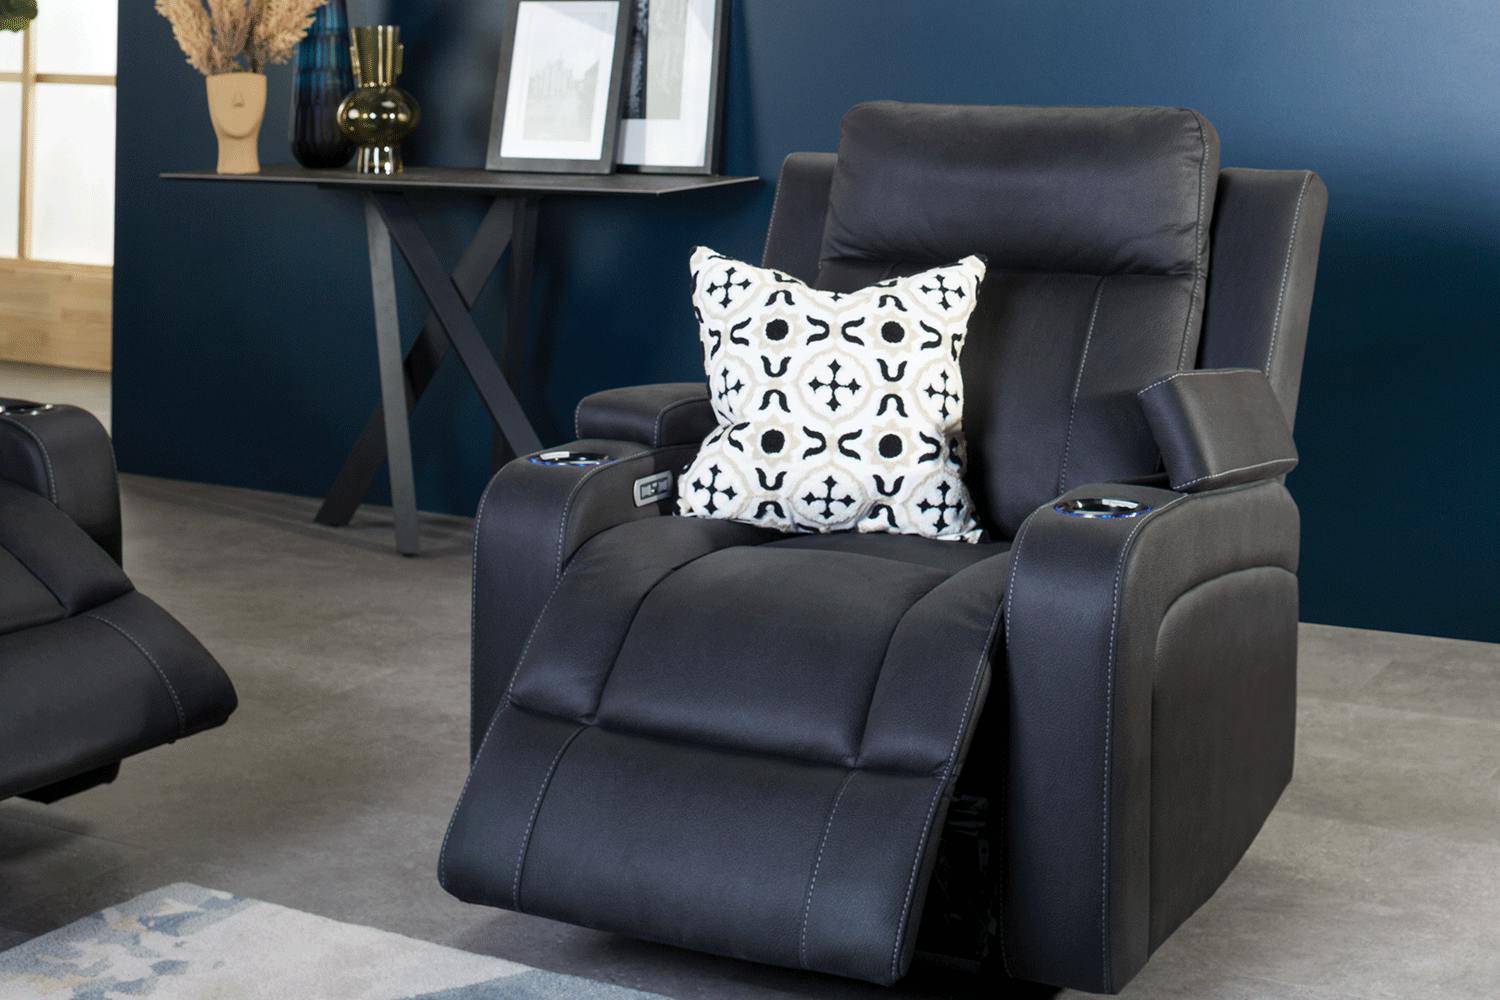 Paramount Fabric Electric Recliner Chair by Dixie Cummings